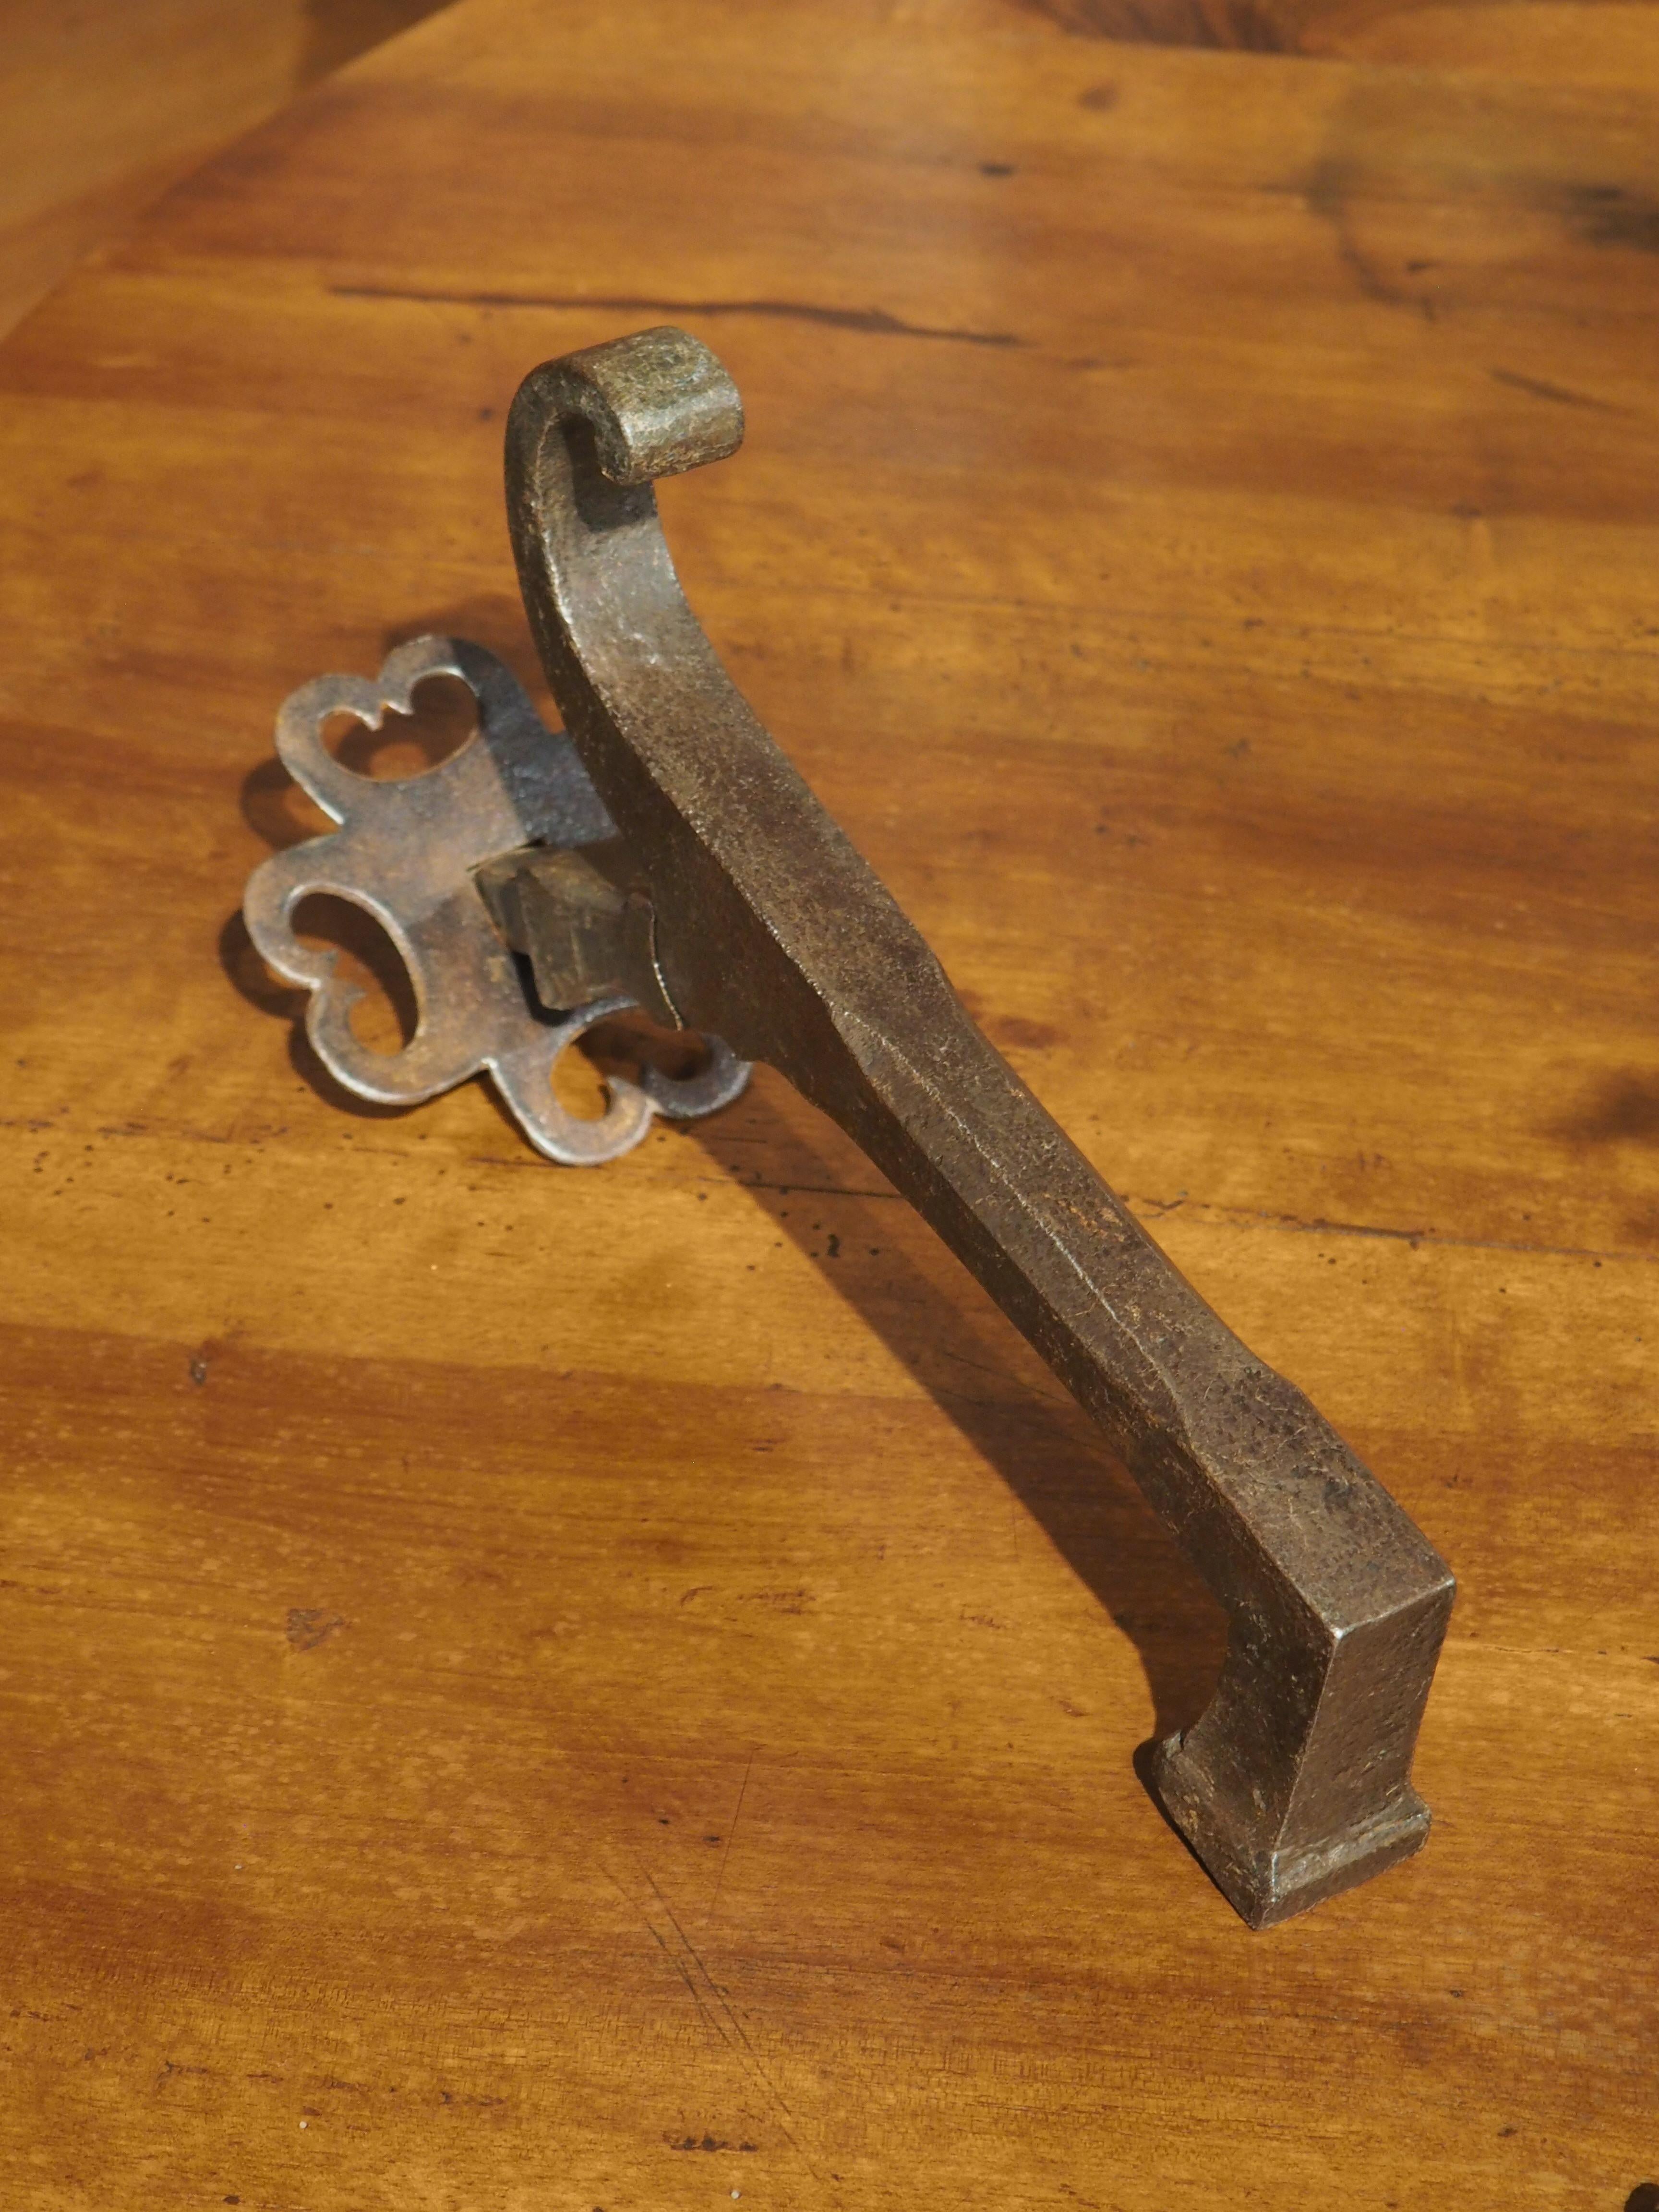 Wrought iron is a very durable, yet malleable material that has been used for centuries to make highly worked items. This polished wrought iron French door knocker from the 1700s has been shaped as an “L” form with a scrolled tip. A horizontal bolt